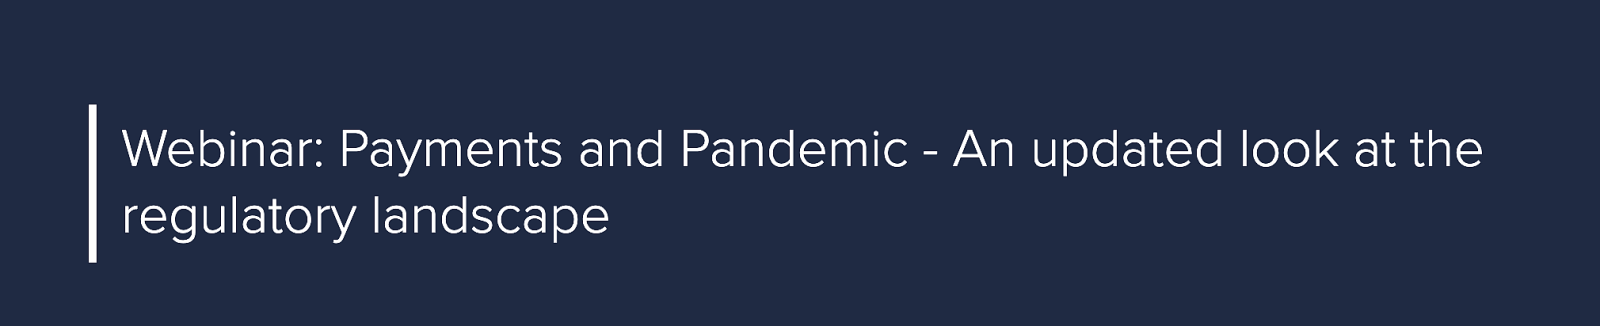 Payments and Pandemic - An updated look at the regulatory landscape